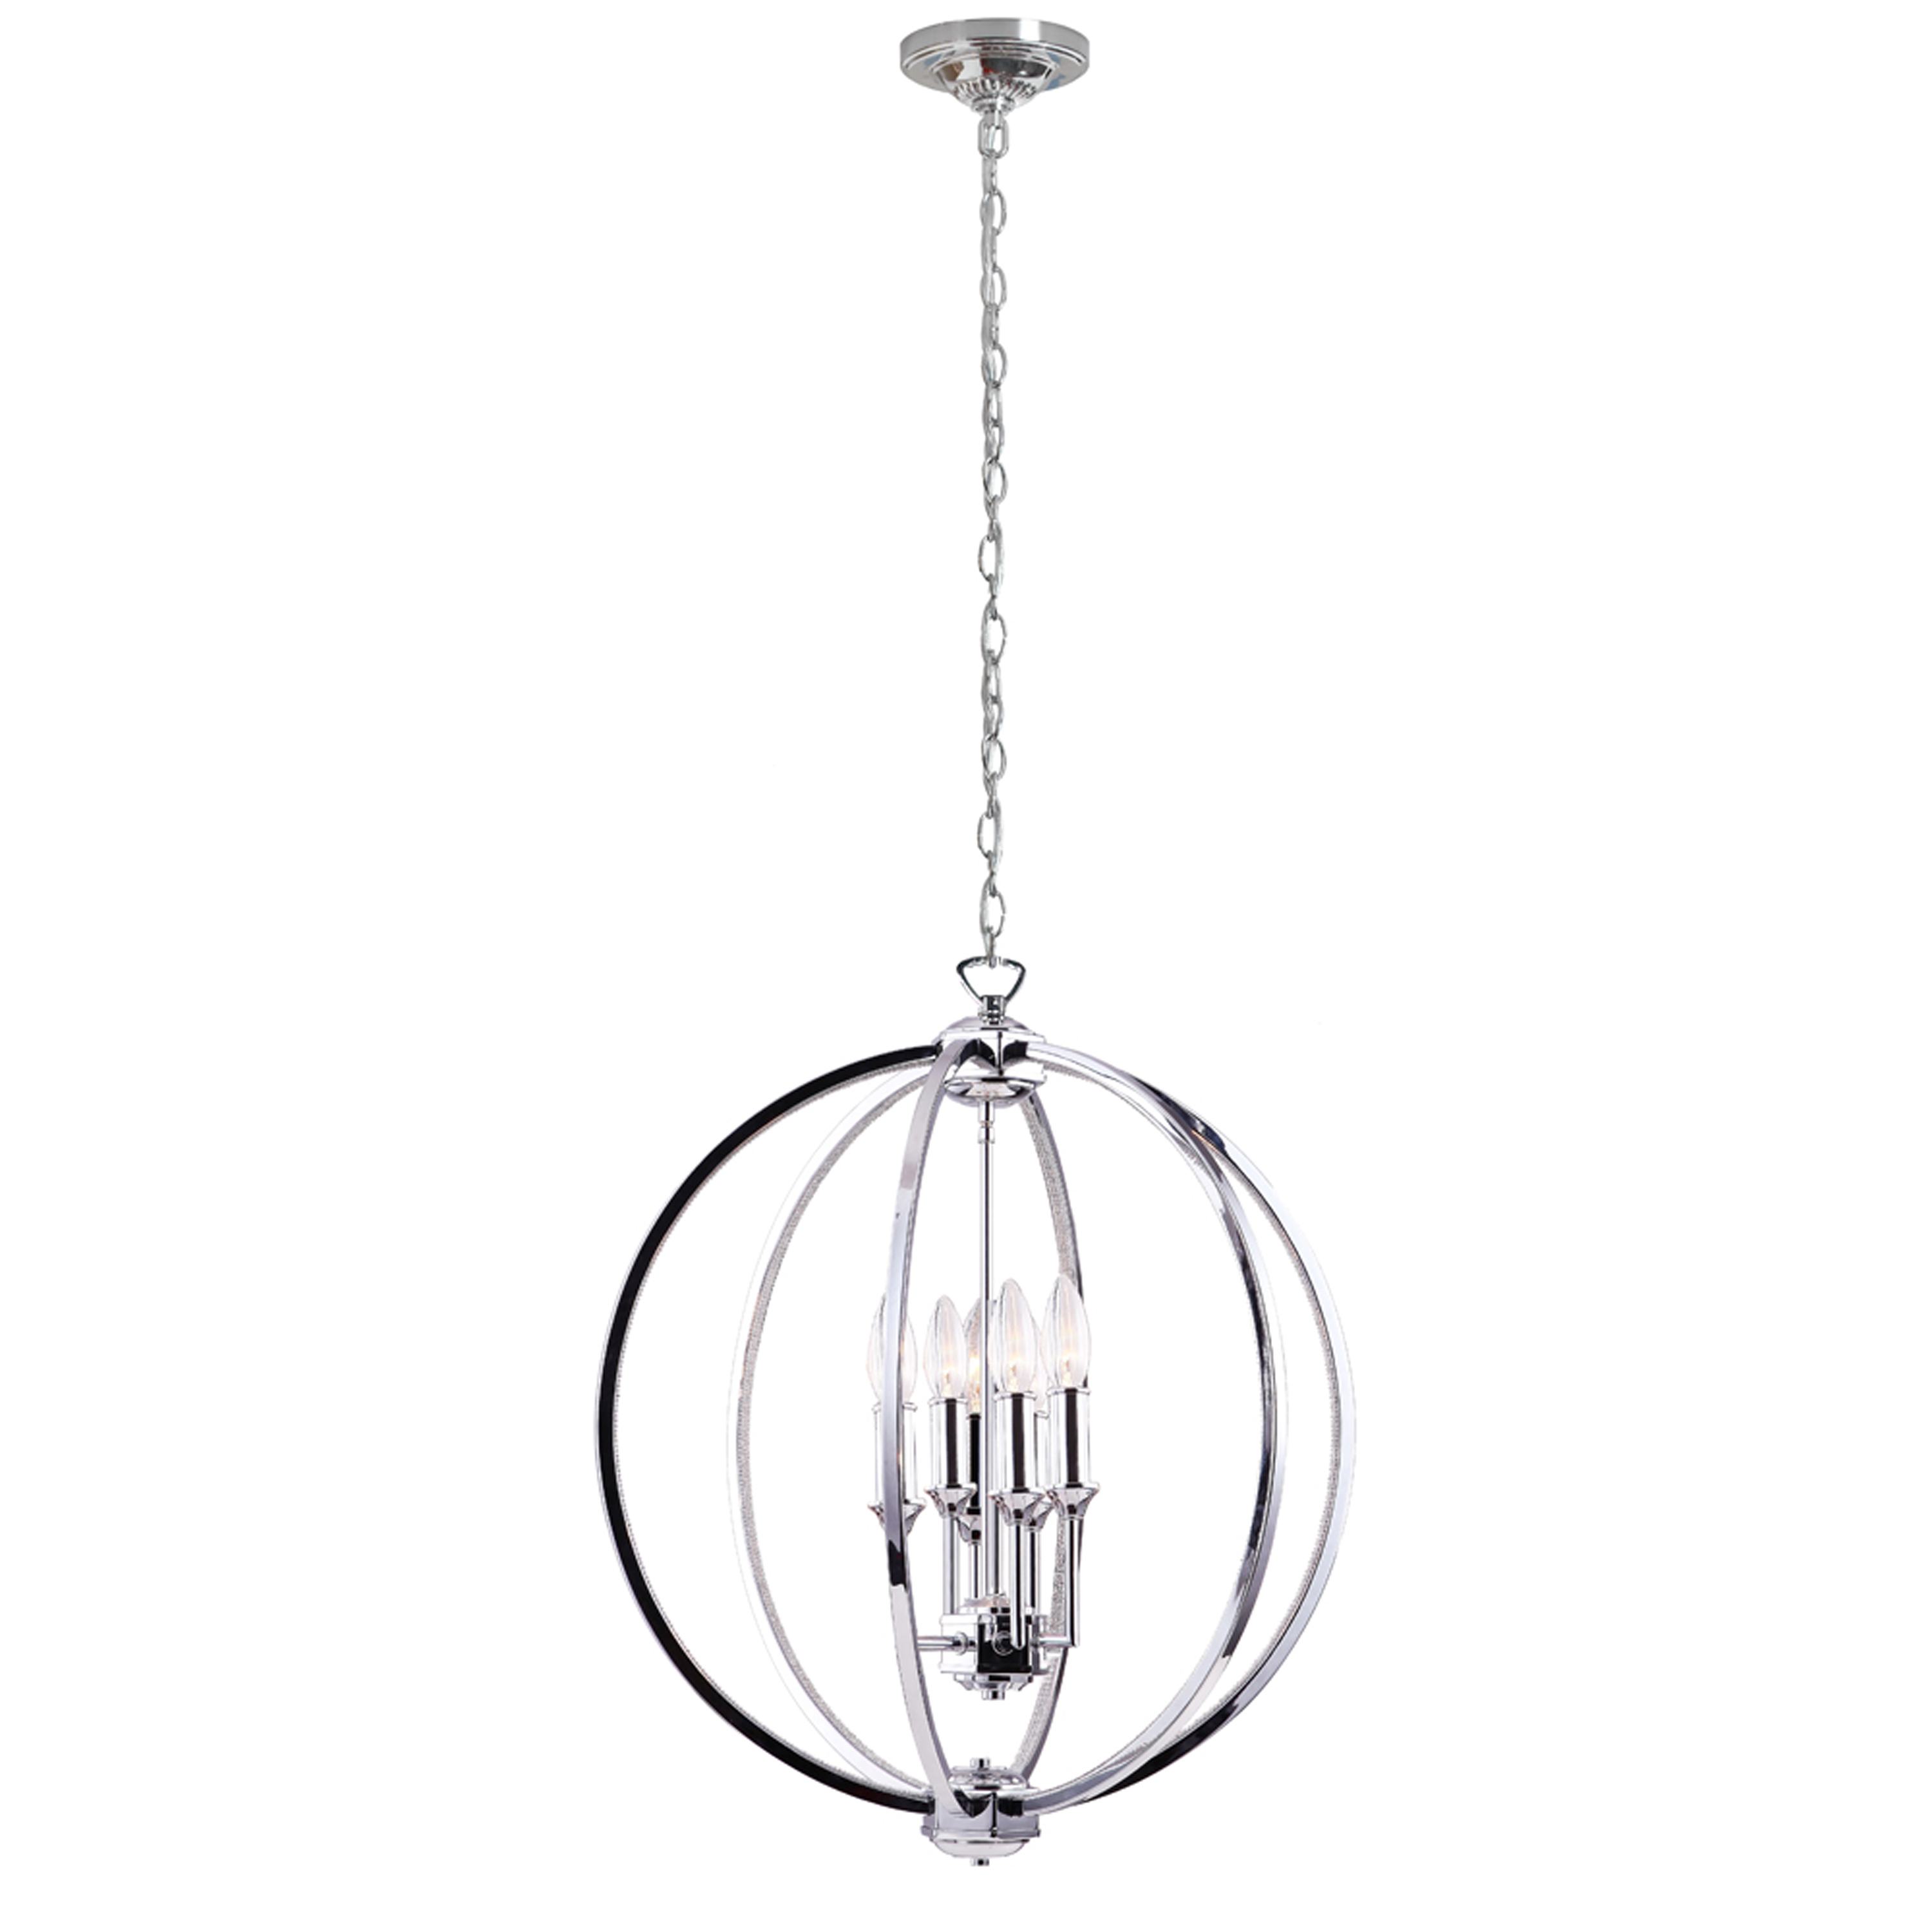 6 Light Chandelier, Polished Chrome w/Jewelled Accents